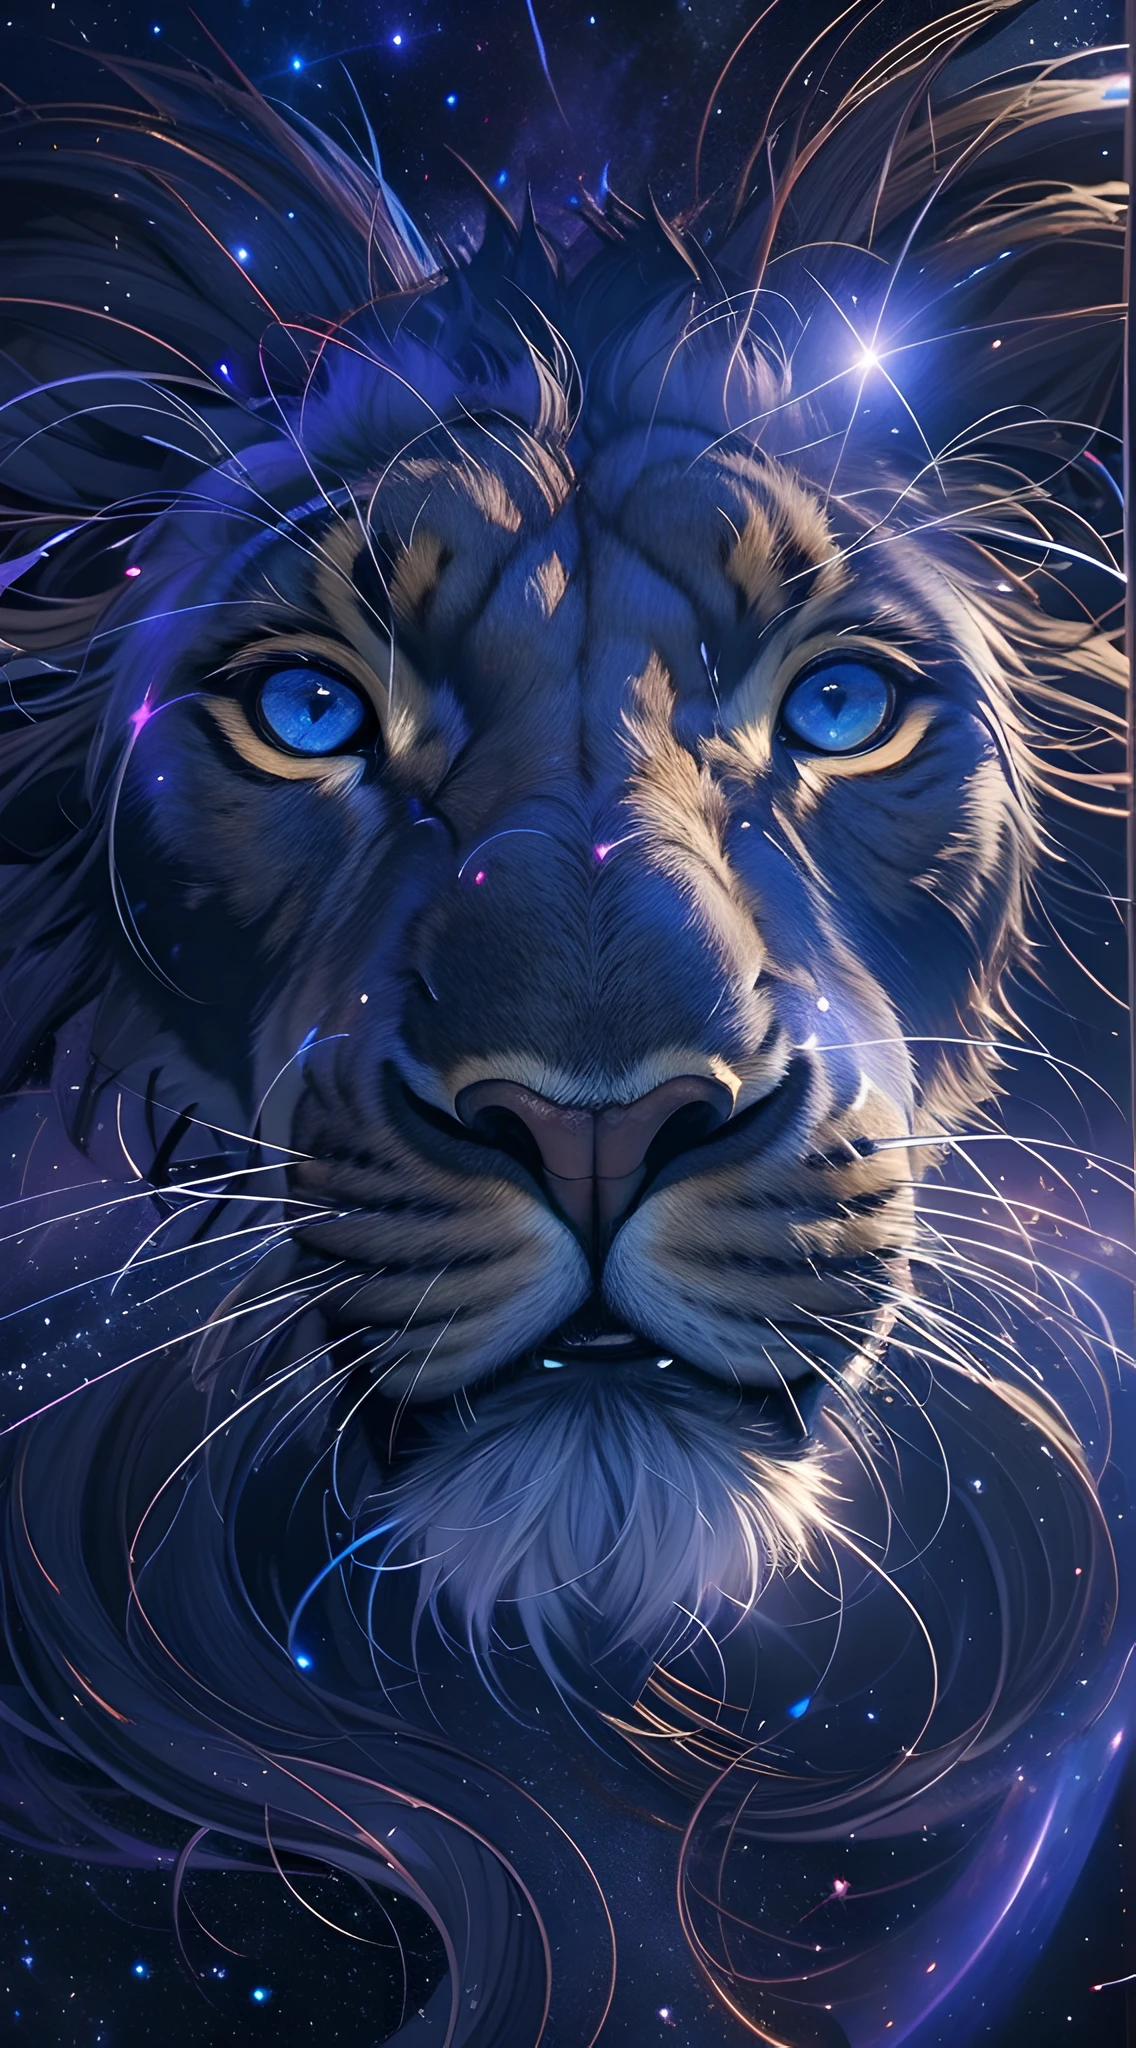 Close up of lion on purple and blue background，portrait of a cosmic entity，Strange portrait of the Milky Way，In the starlight plane） ） ），Astral appearance，galactic dmt entity，Themes around Nebula Halos，Glowing black halo，cosmic entity，Galactic entity，galactic deity，Cosmic terrorist entities，quality astral projection render，Portrait of the cosmic god，astral ethereal